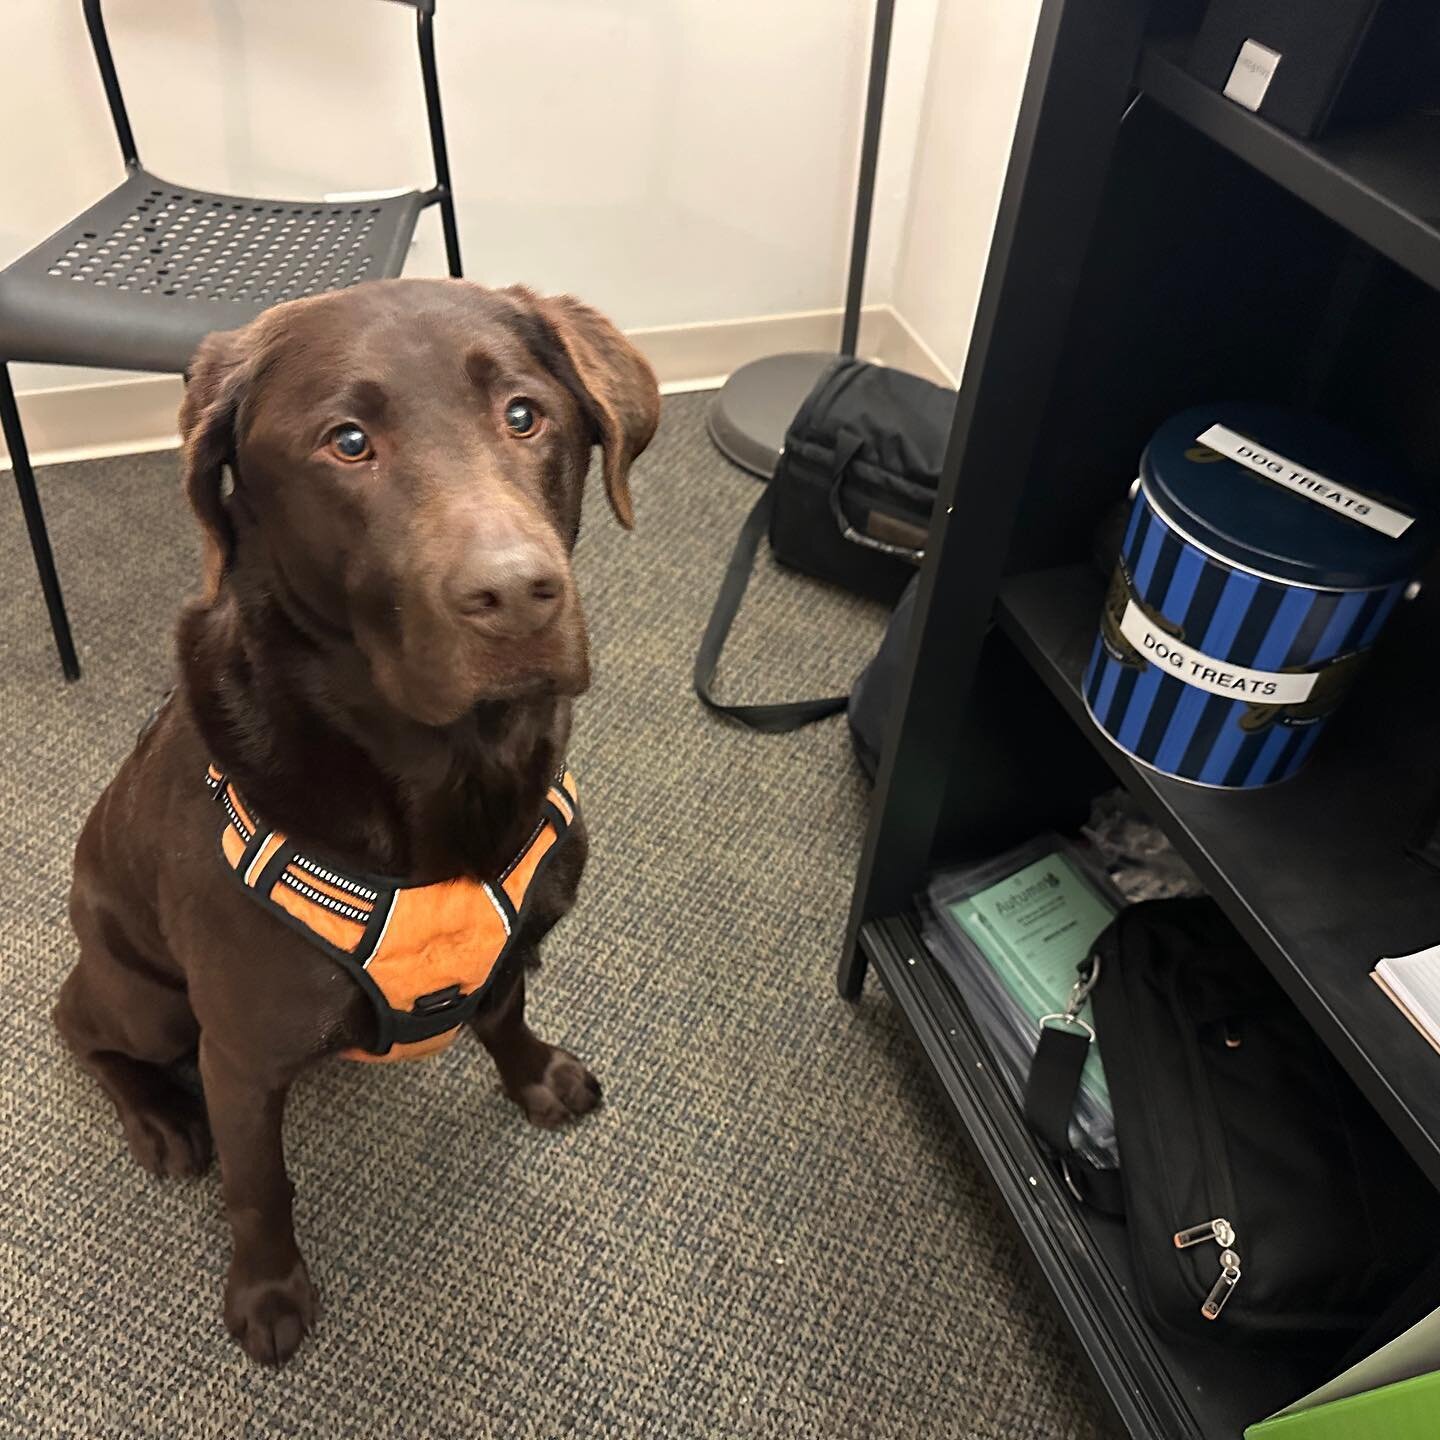 No @garrettpopcorn for this pooch!  Grizzly, Autumn&rsquo;s Chief Dog Officer, knows where the good dog treats are when he visits Jimmy Rio&rsquo;s office, our Director of Services.